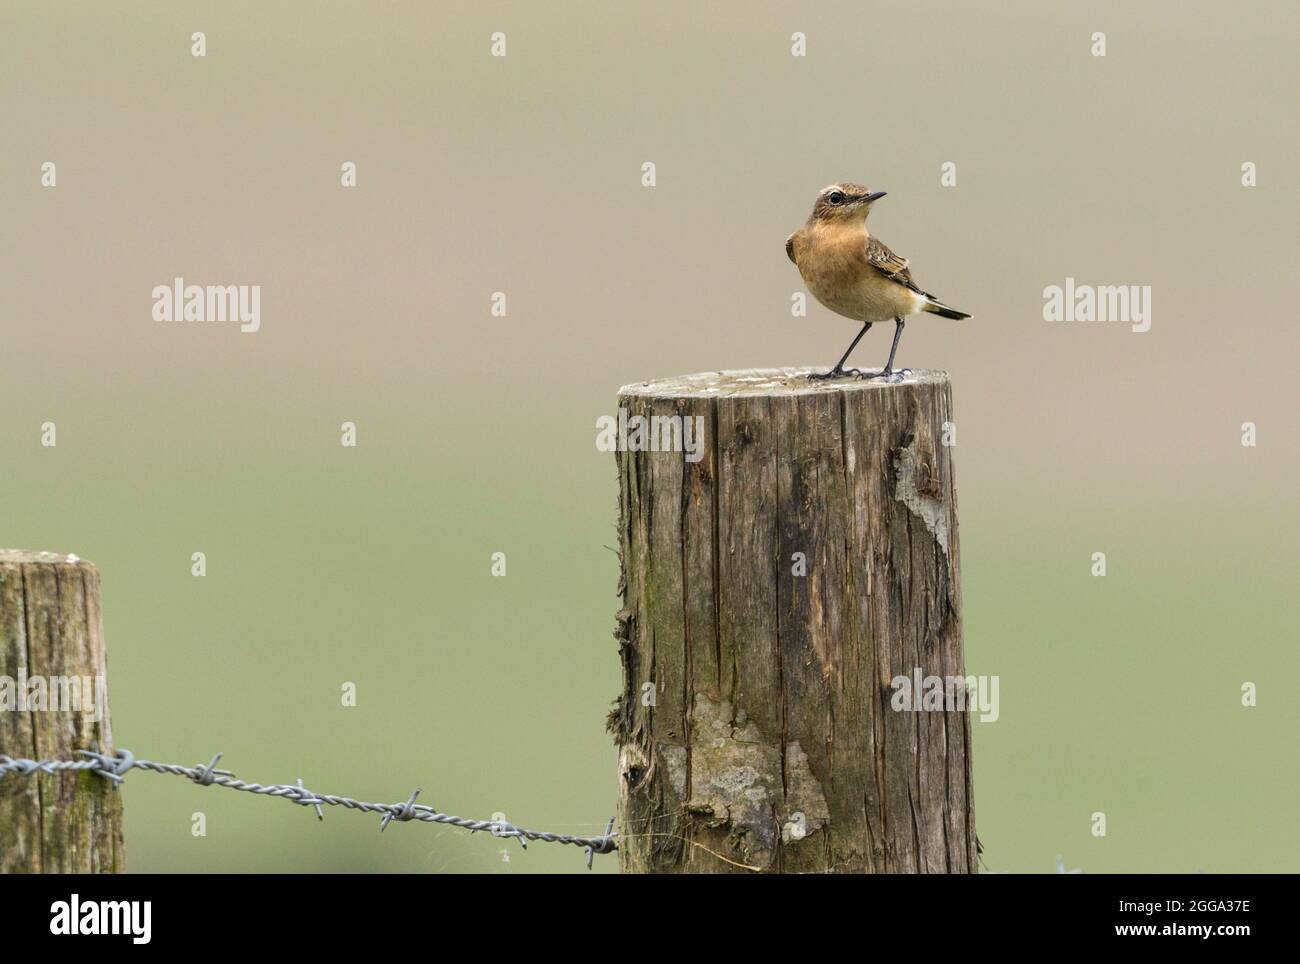 Wheatear (Oenanthe oenanthe) female bird in late summer plumage sandy brown dark tail and wing tips white rump perched on fence post look out for food Stock Photo